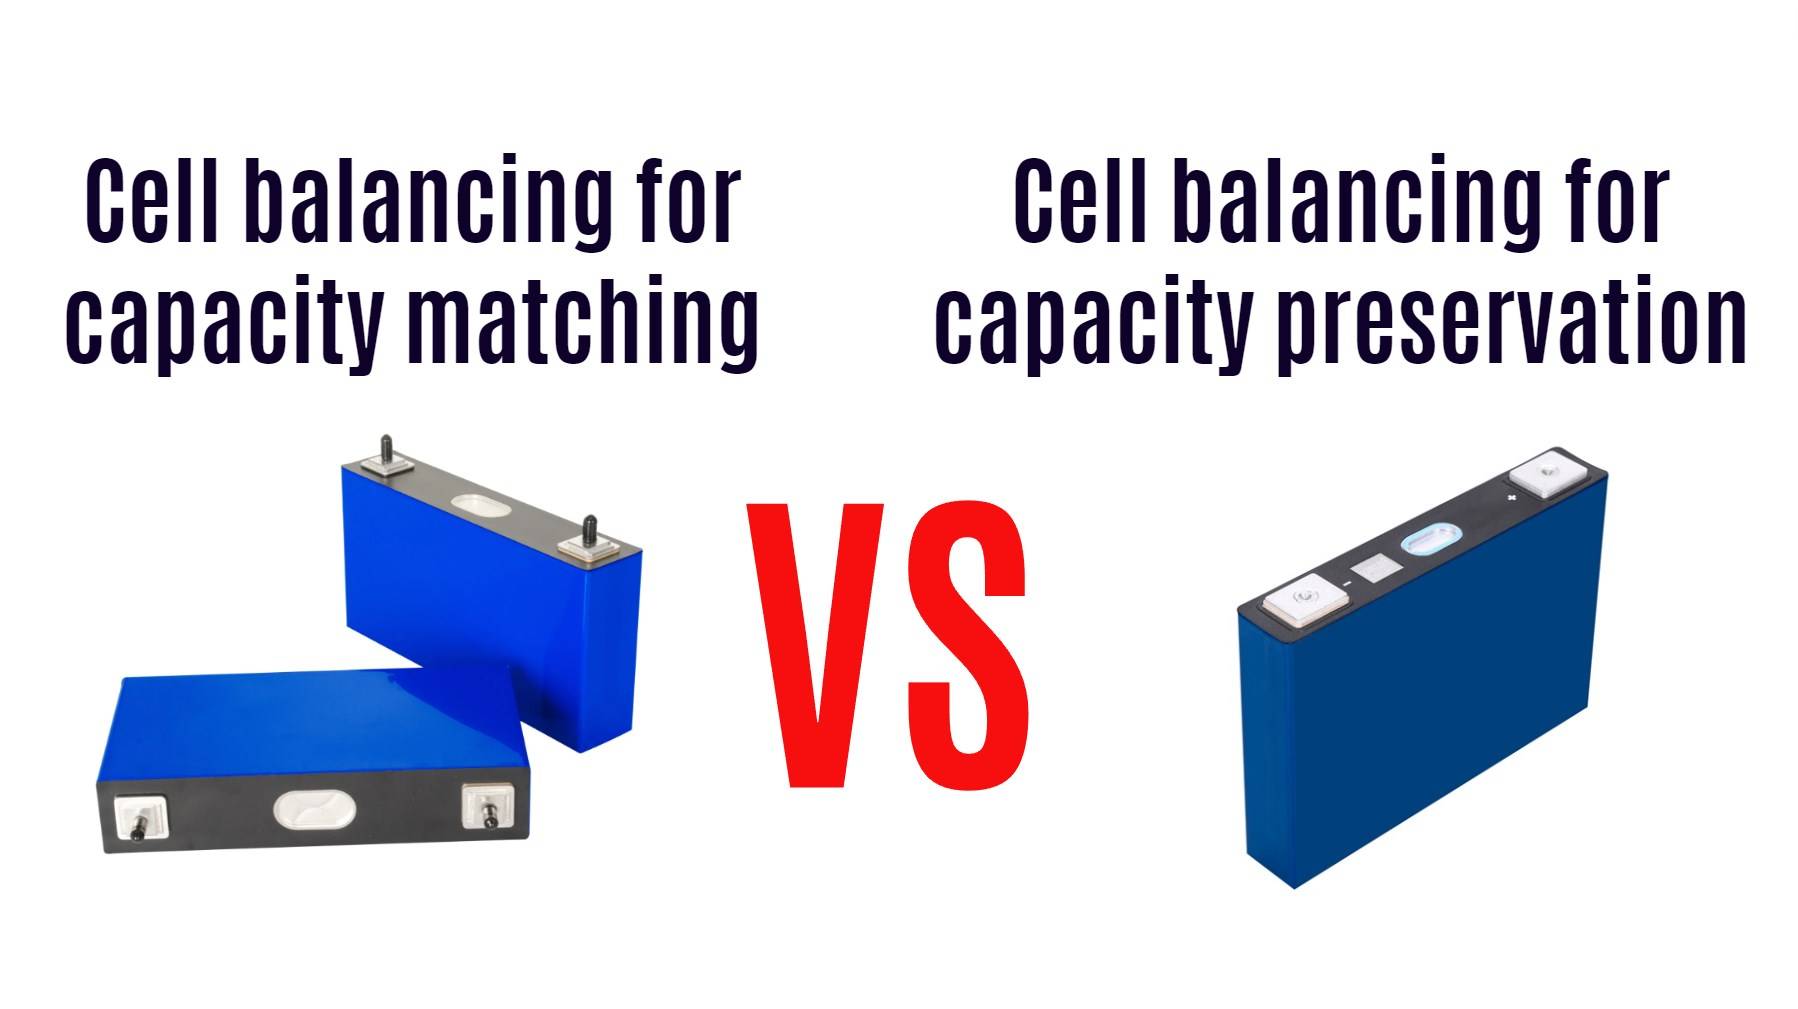 Cell balancing for capacity matching vs. Cell balancing for capacity preservation